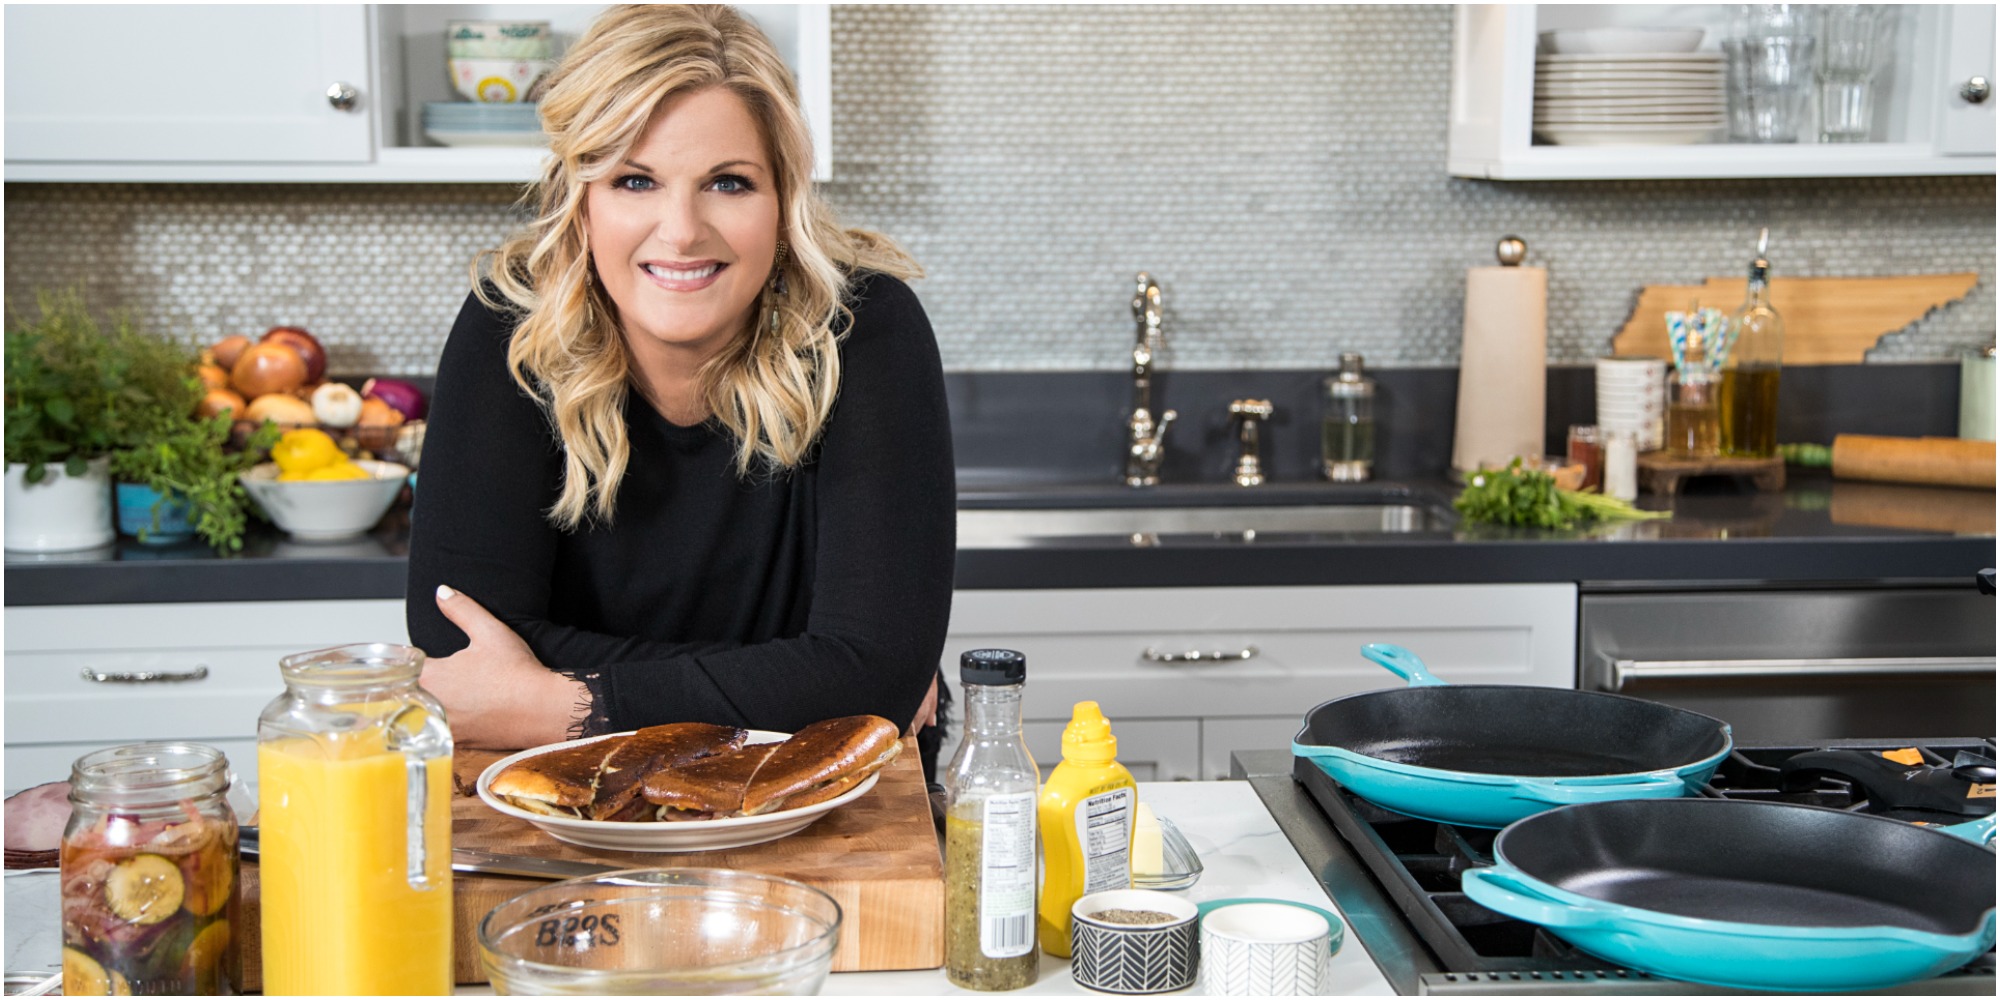 Food Network star Trisha Yearwood's Mac and Cheese is a creamy, dreamy side dish featured on Trisha's Southern Kitchen.